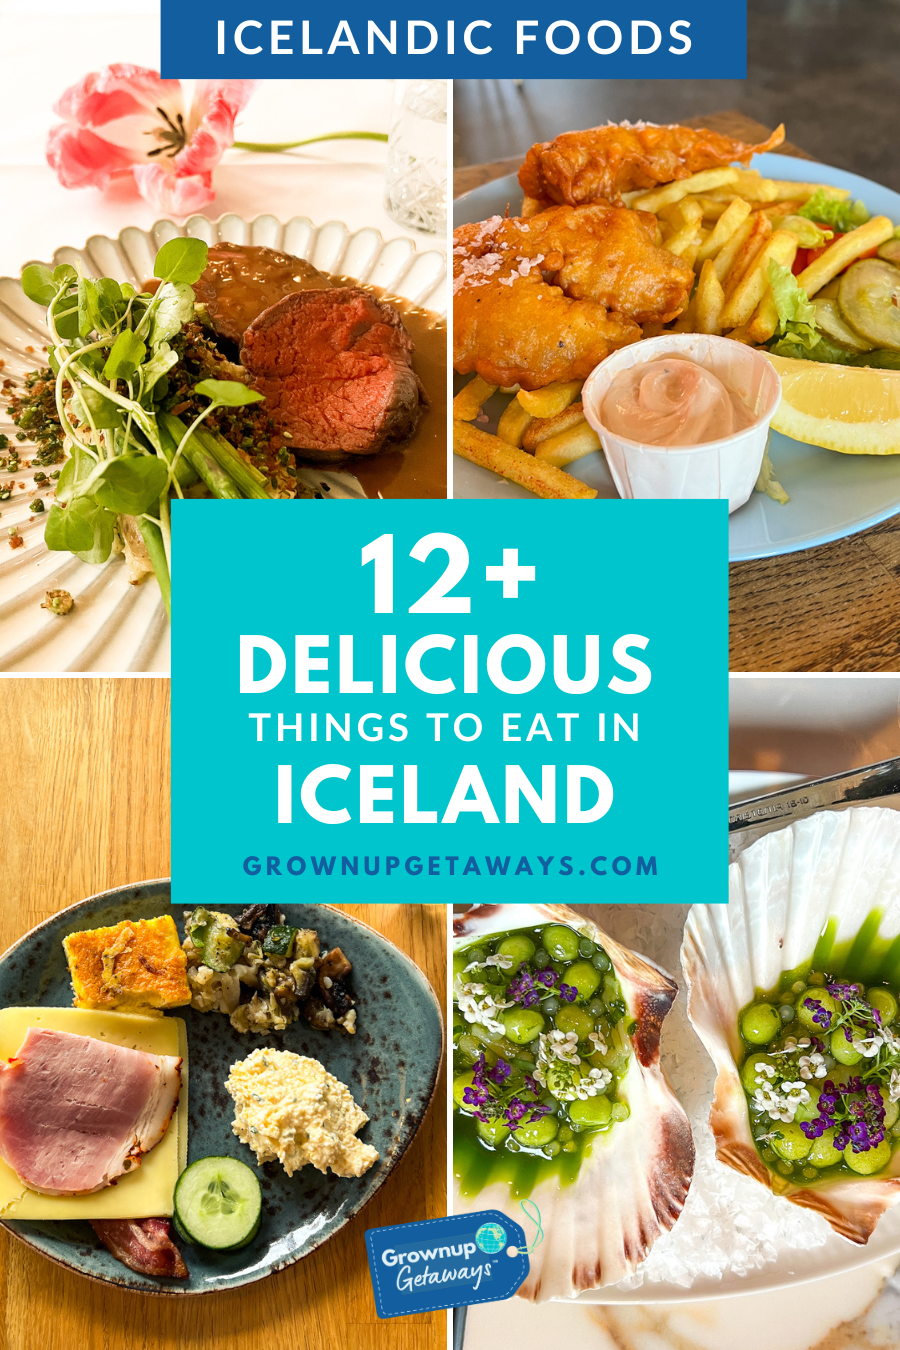 Delicious Things to Eat in Iceland